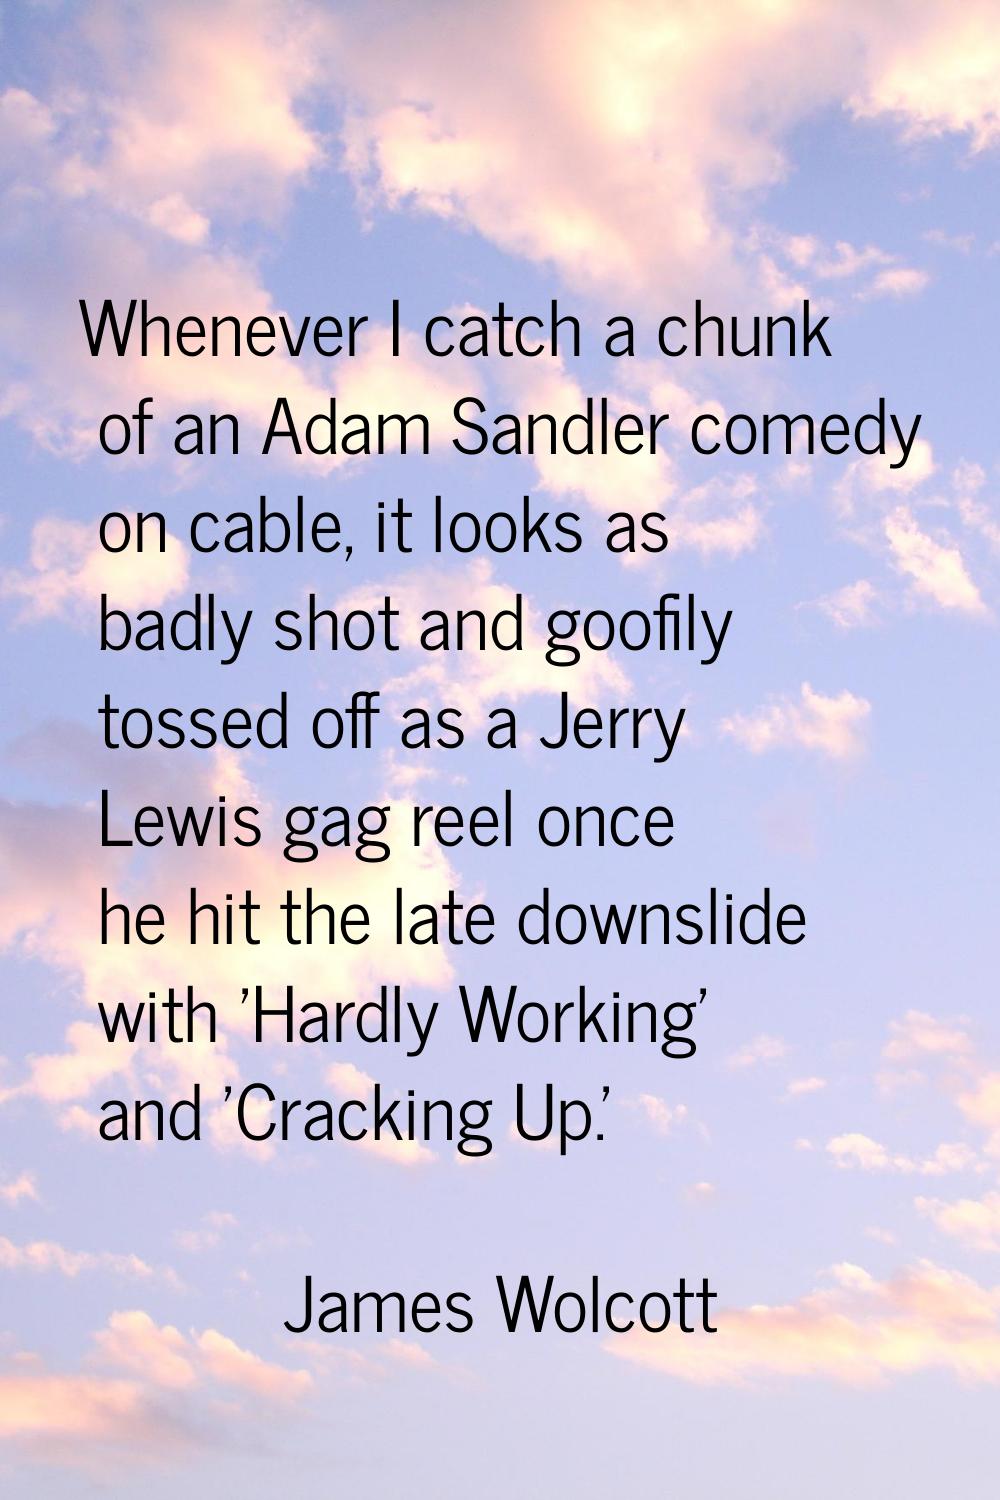 Whenever I catch a chunk of an Adam Sandler comedy on cable, it looks as badly shot and goofily tos